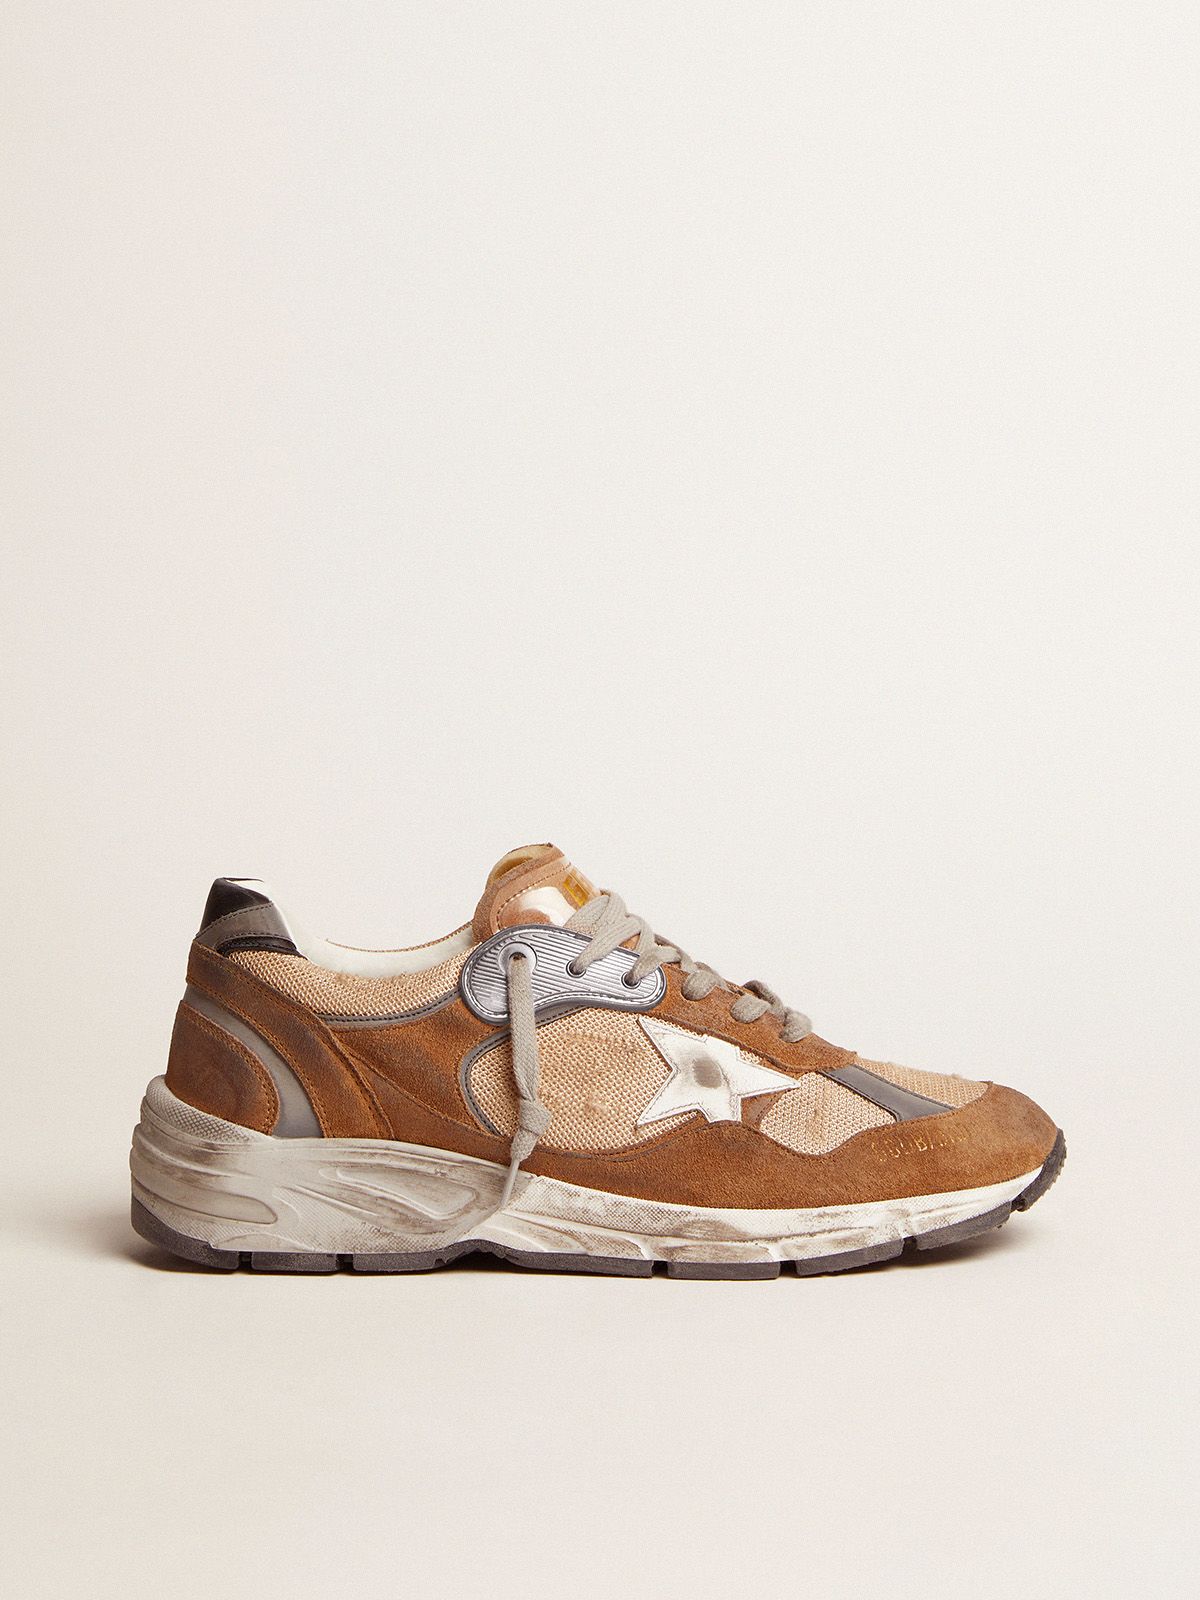 golden goose suede in star and tab heel mesh Dad-Star tobacco-colored black with leather sneakers white